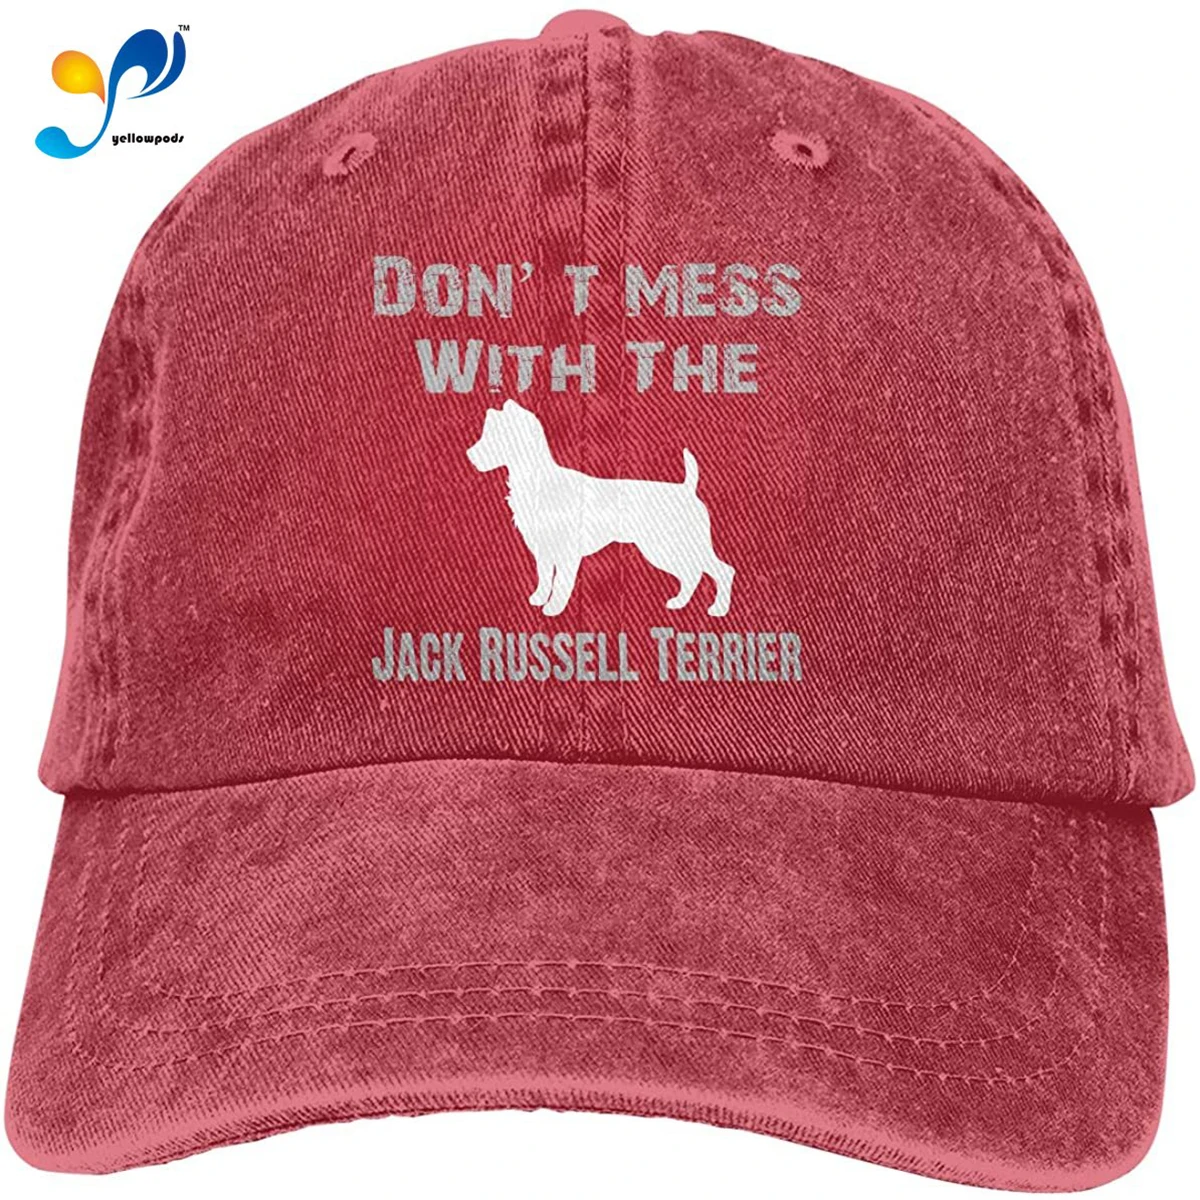 

Hats For Women Don't Mess With The Jack Russell Terrier Unisex Baseball Cap Cowboy Hat Dad Hats Trucker Hat